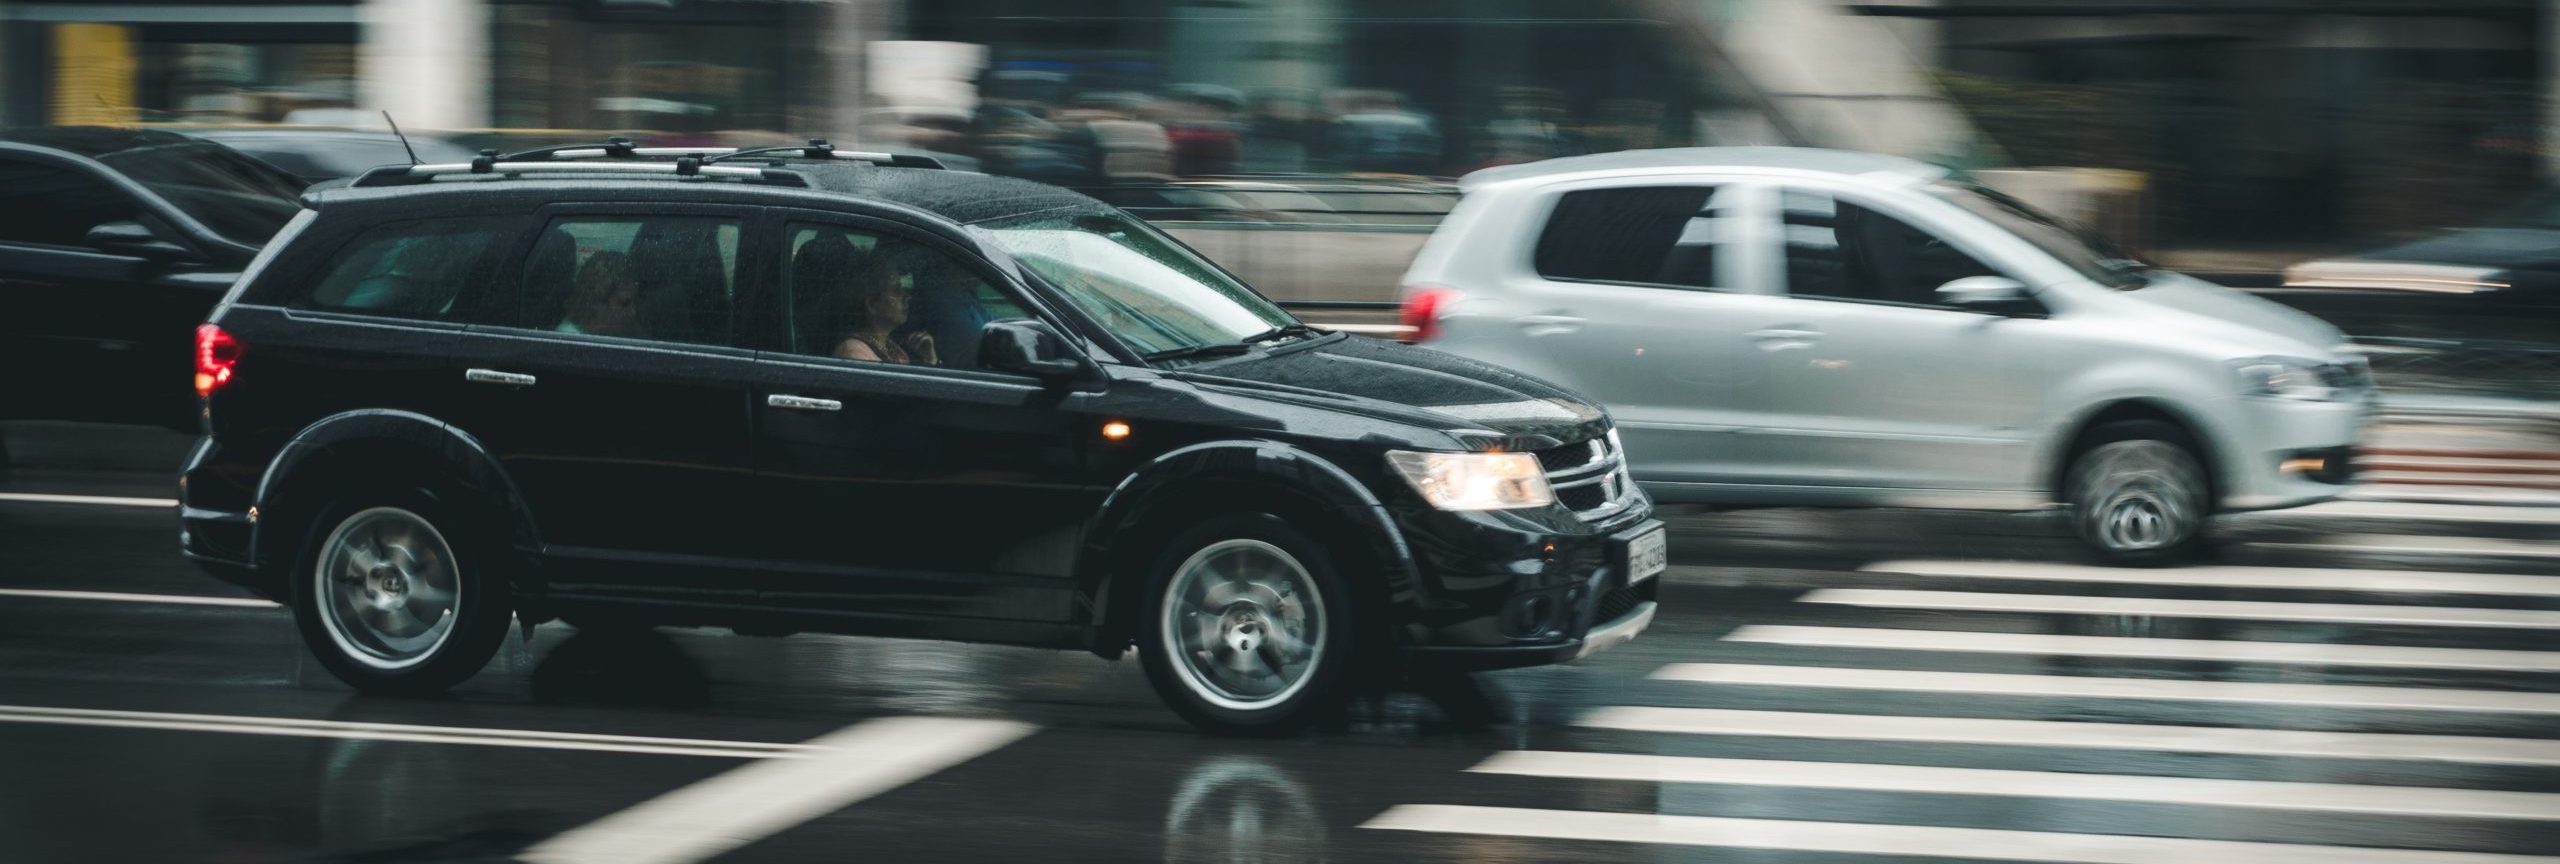 Accident With an Uninsured Driver in New Jersey, Connecticut, Massachusetts, or Illinois? Here’s What You Should Know